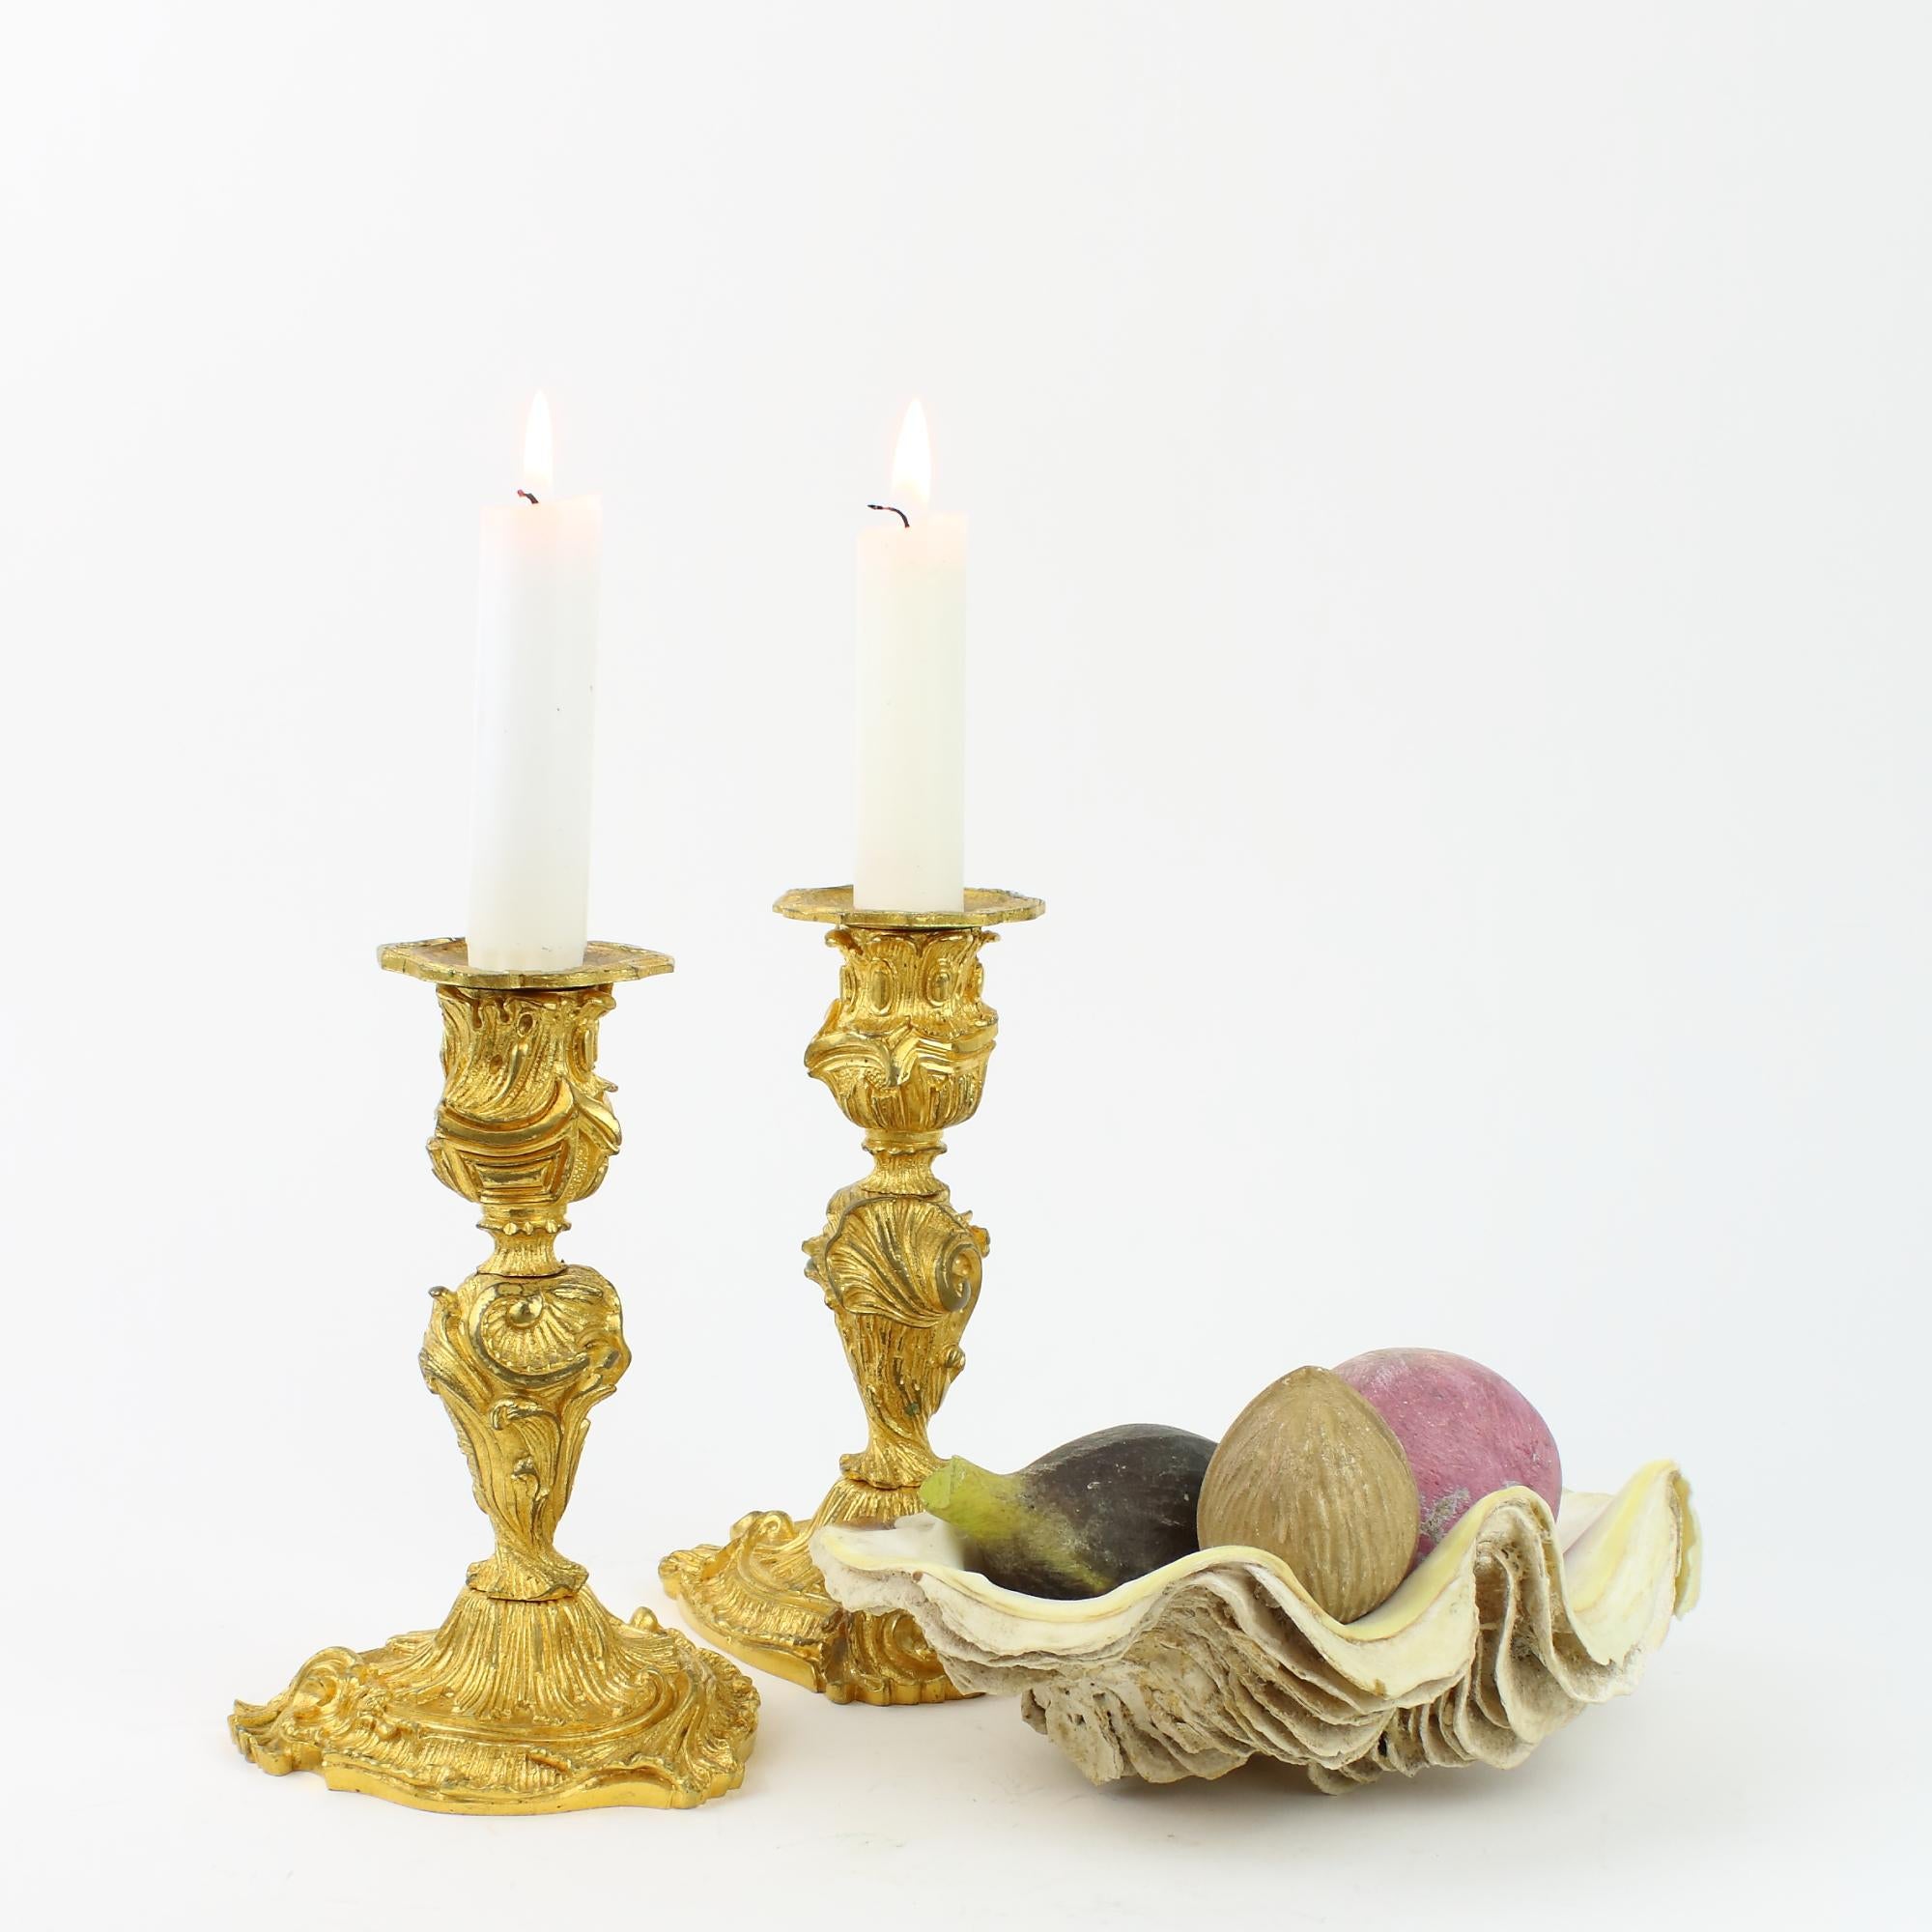 Pair of French 18th Century Small Louis XV Gilt Bronze Candlesticks

Short stem of swirling asymmetrical Rococo form with shell-like and foliage decoration, conforming nozzle and foliate, removable drip-pan, above a rounded triangle-shaped base with